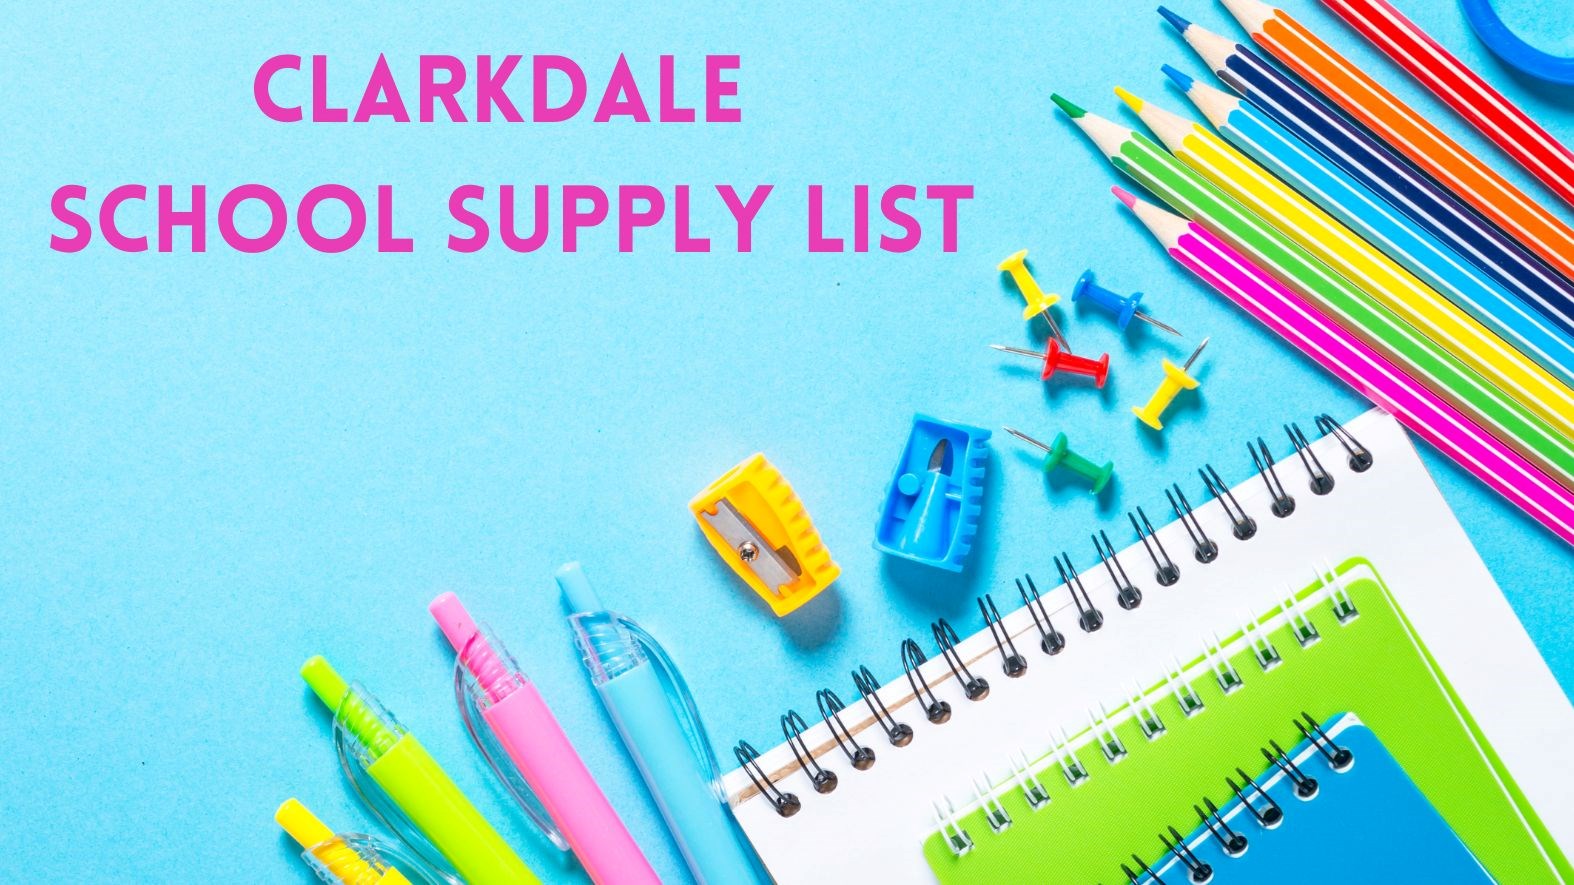 The words Clarkdale School Supply List in pink on blue background with pictures of notebooks, colored pencils, push pins, and pencil sharpeners